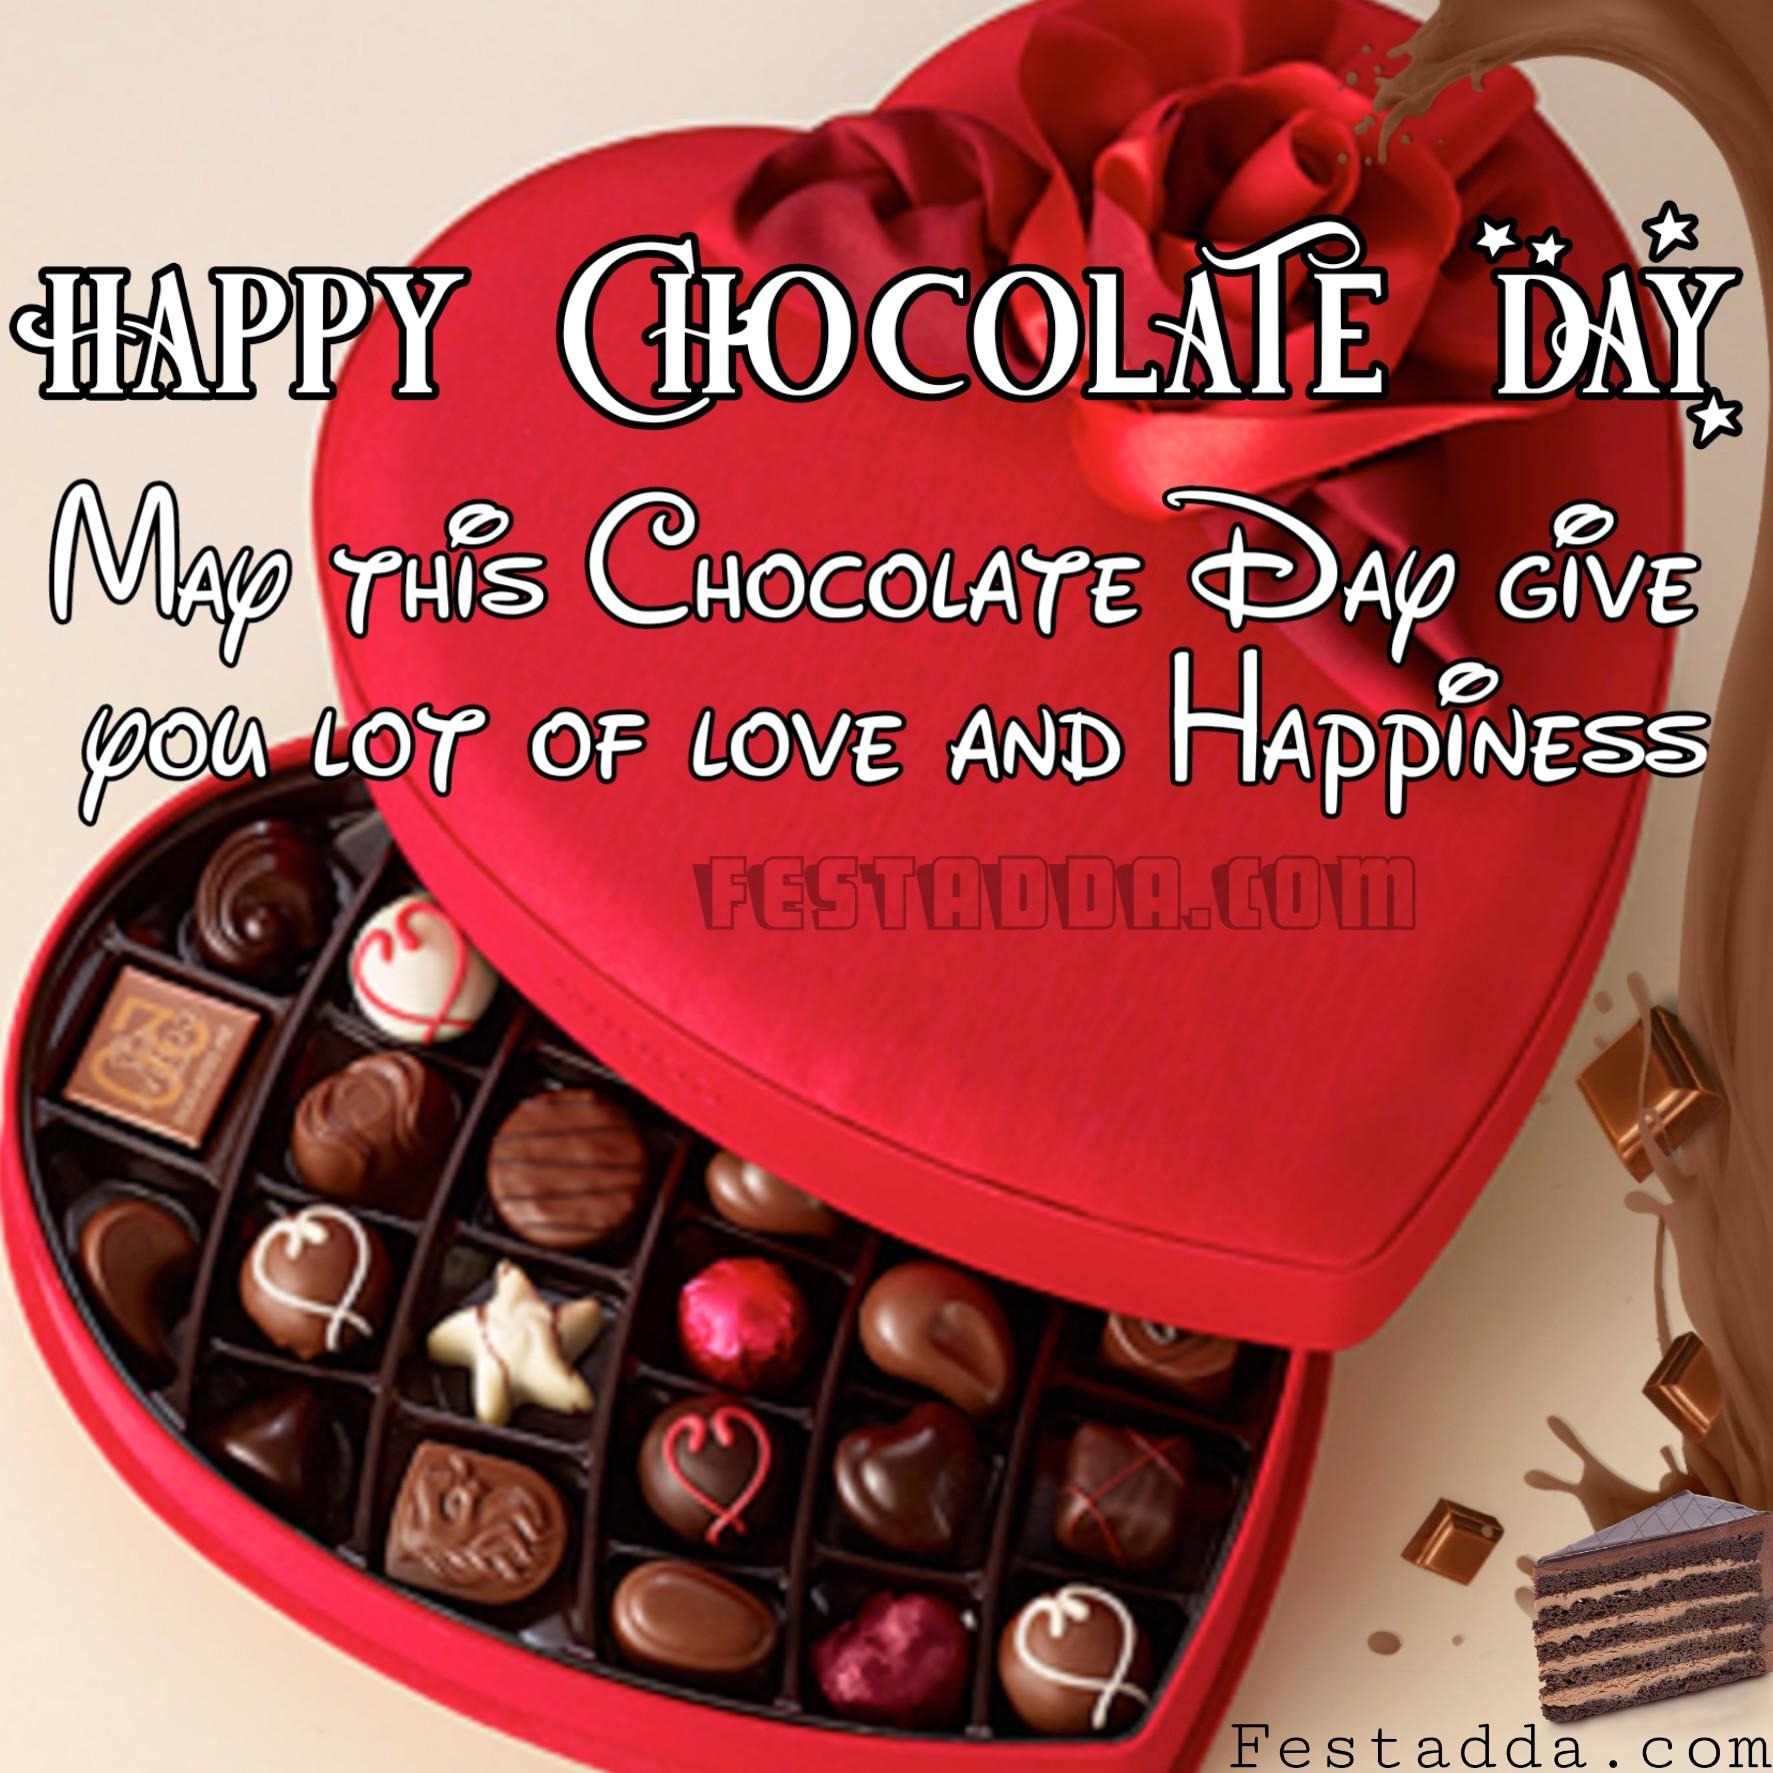 Happy Chocolate Day 2019 Image Day Image